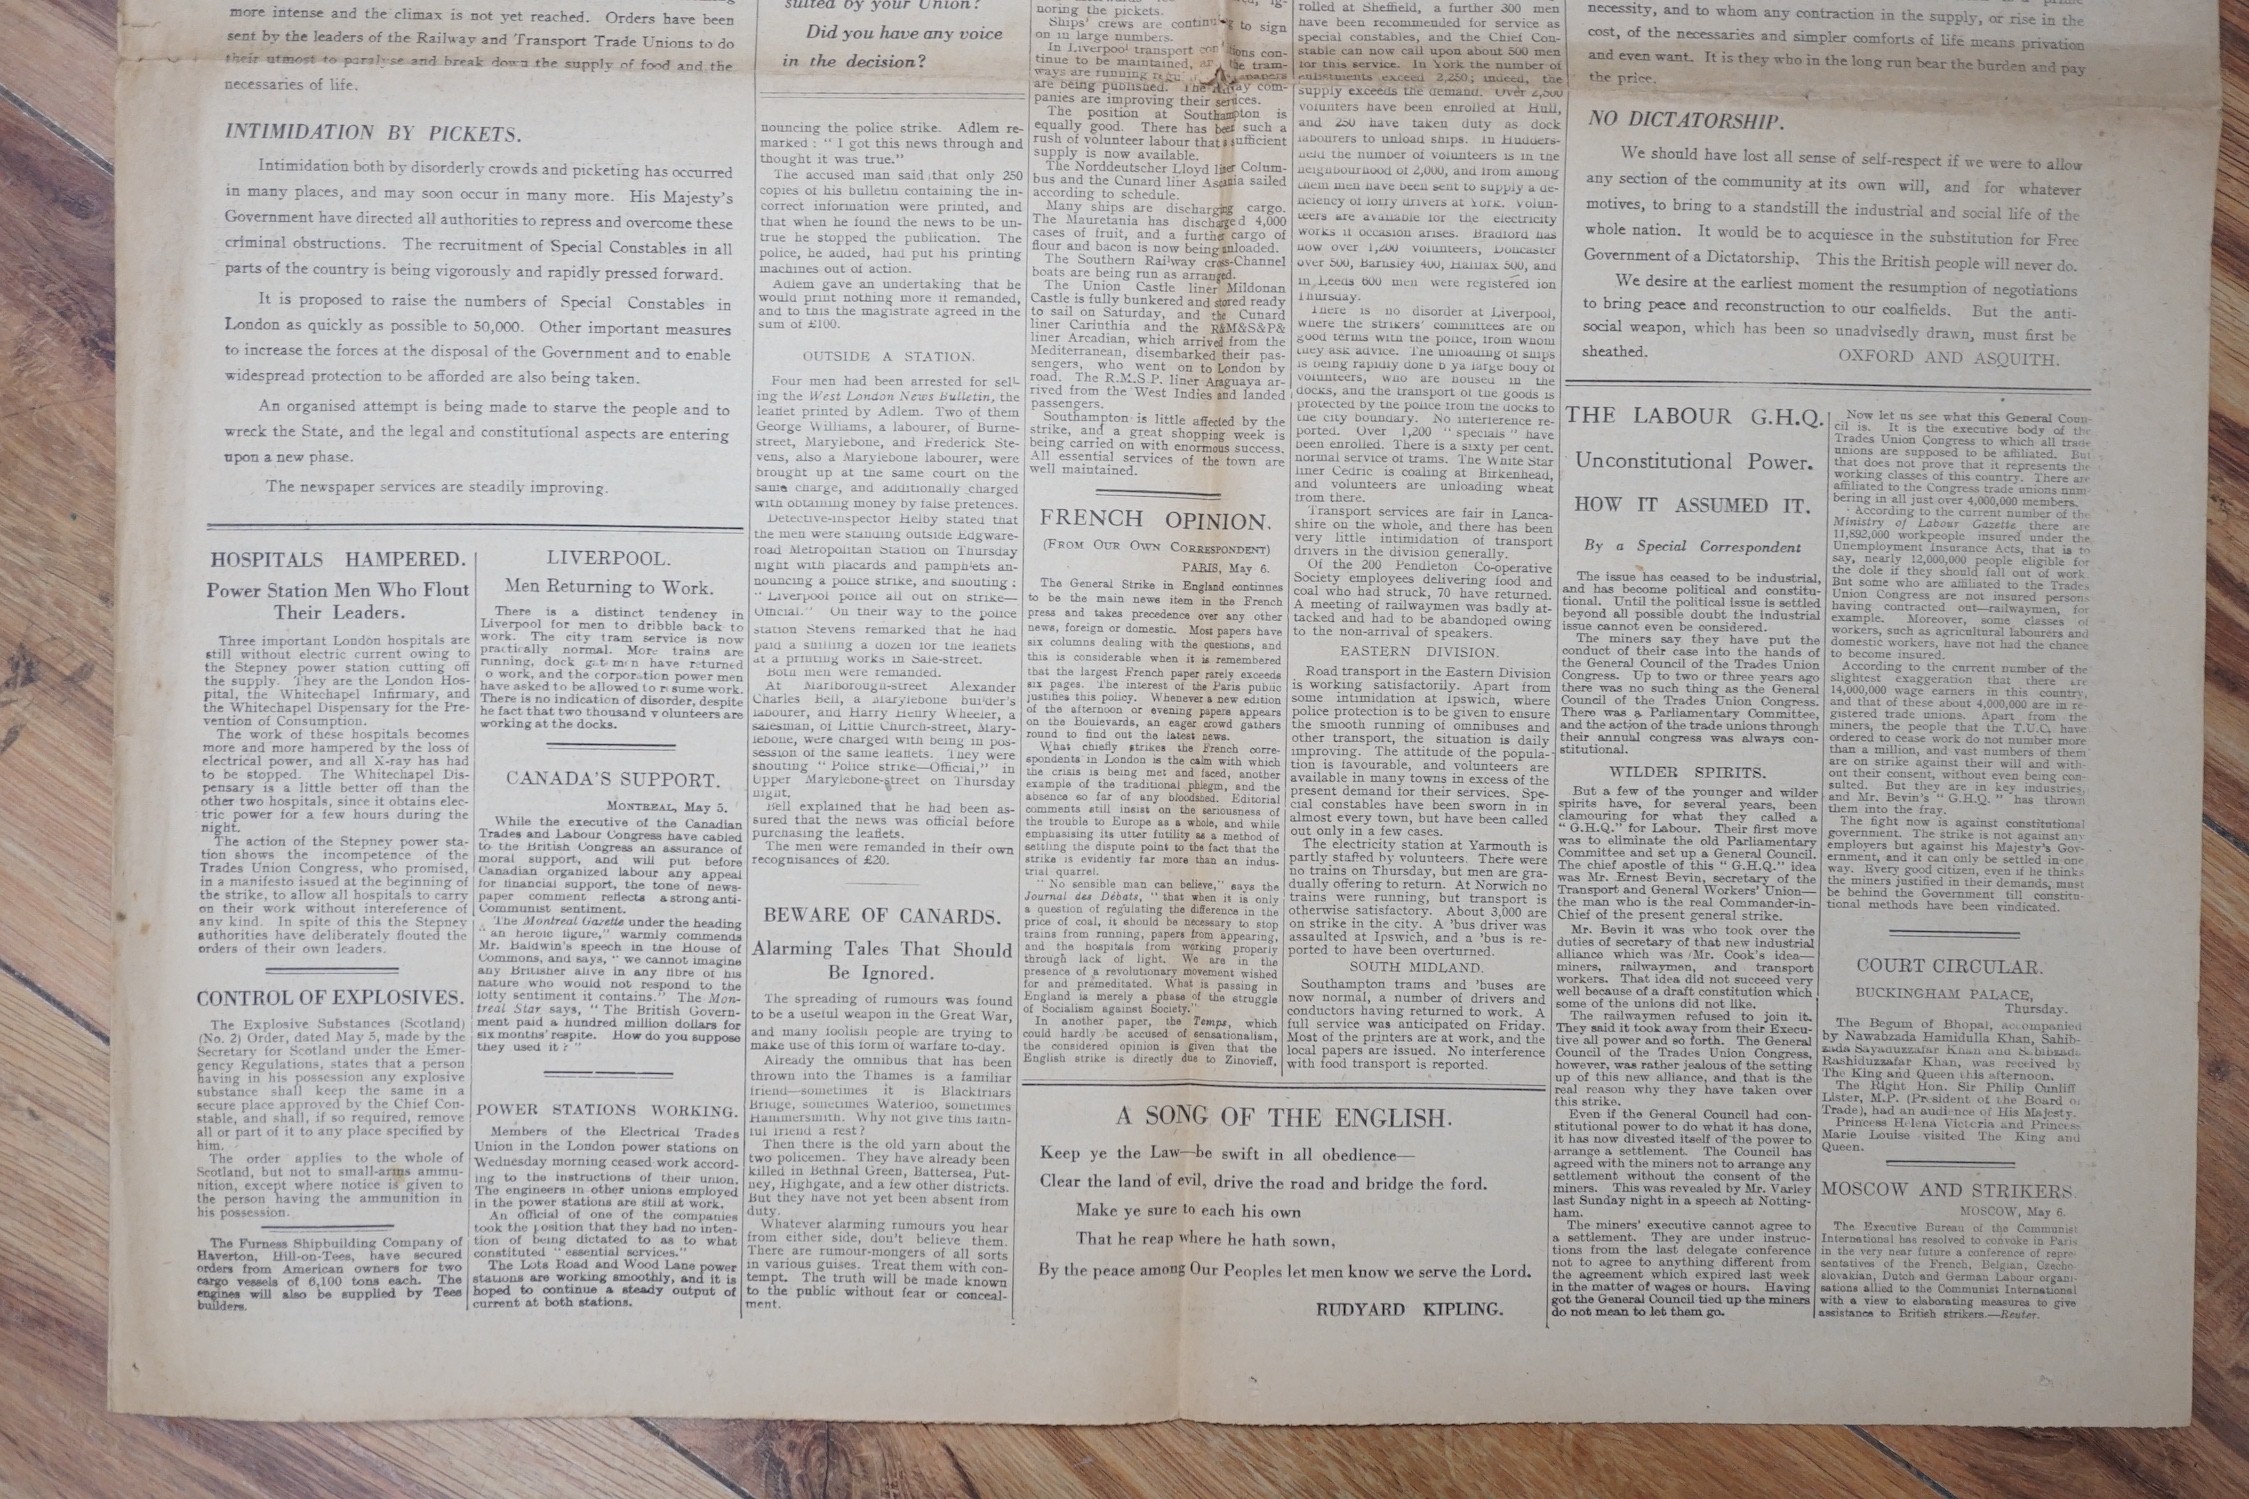 A selection of two British Gazette editions and ephemera